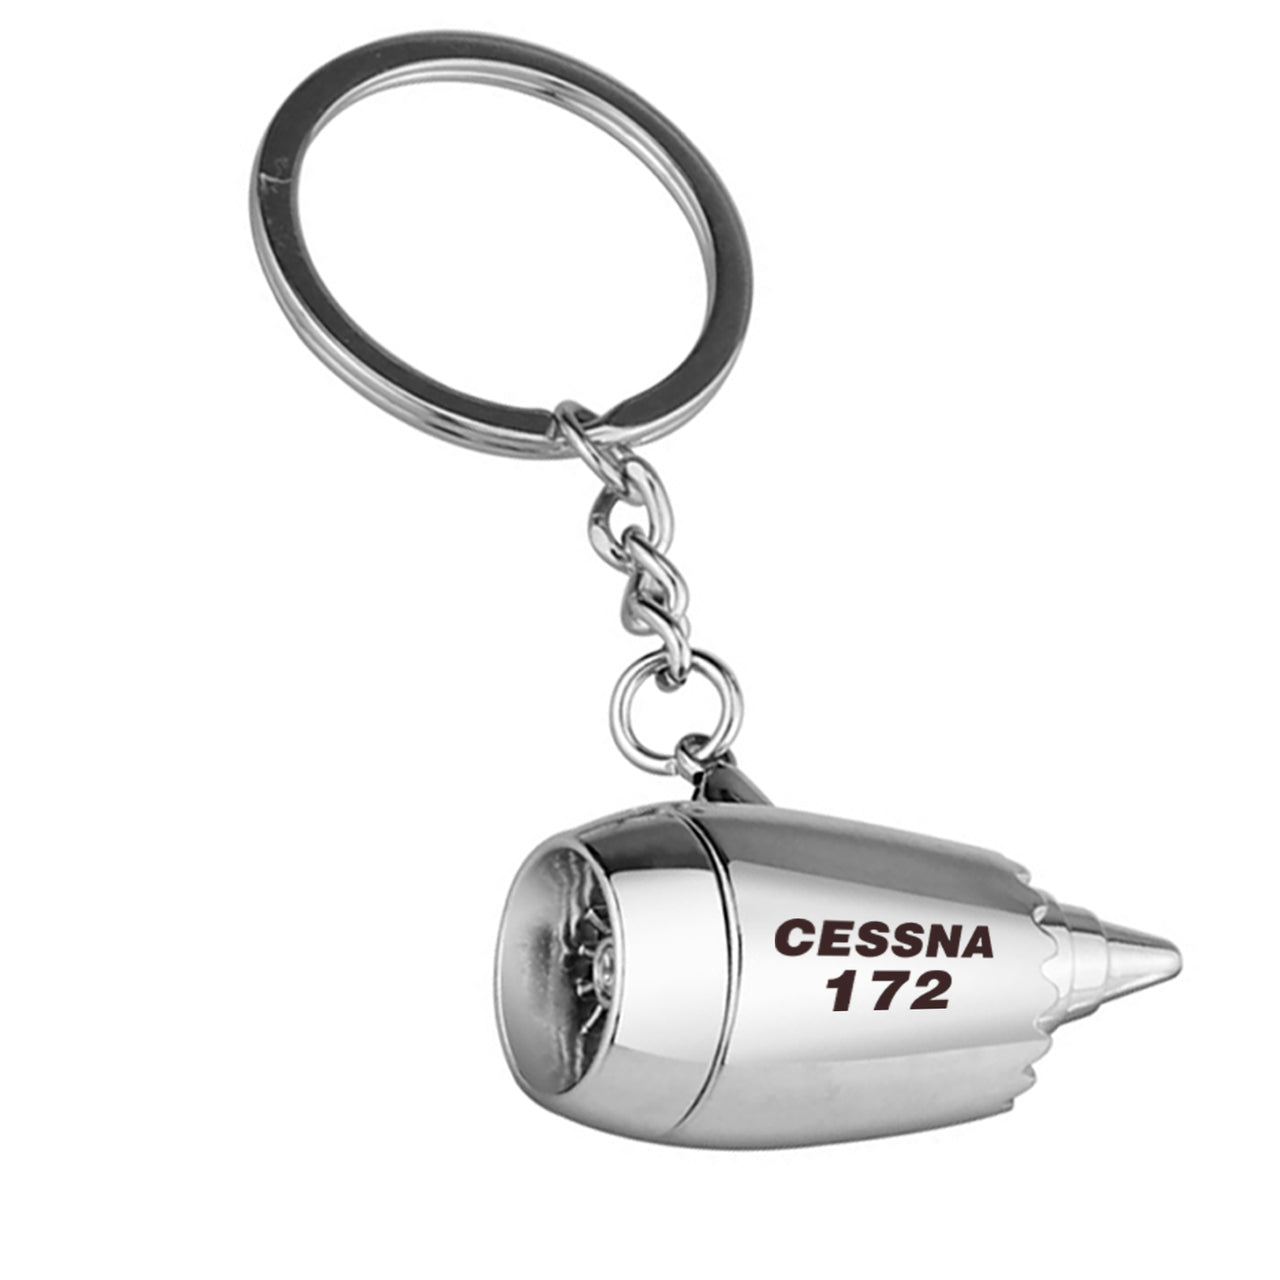 The Cessna 172 Designed Airplane Jet Engine Shaped Key Chain